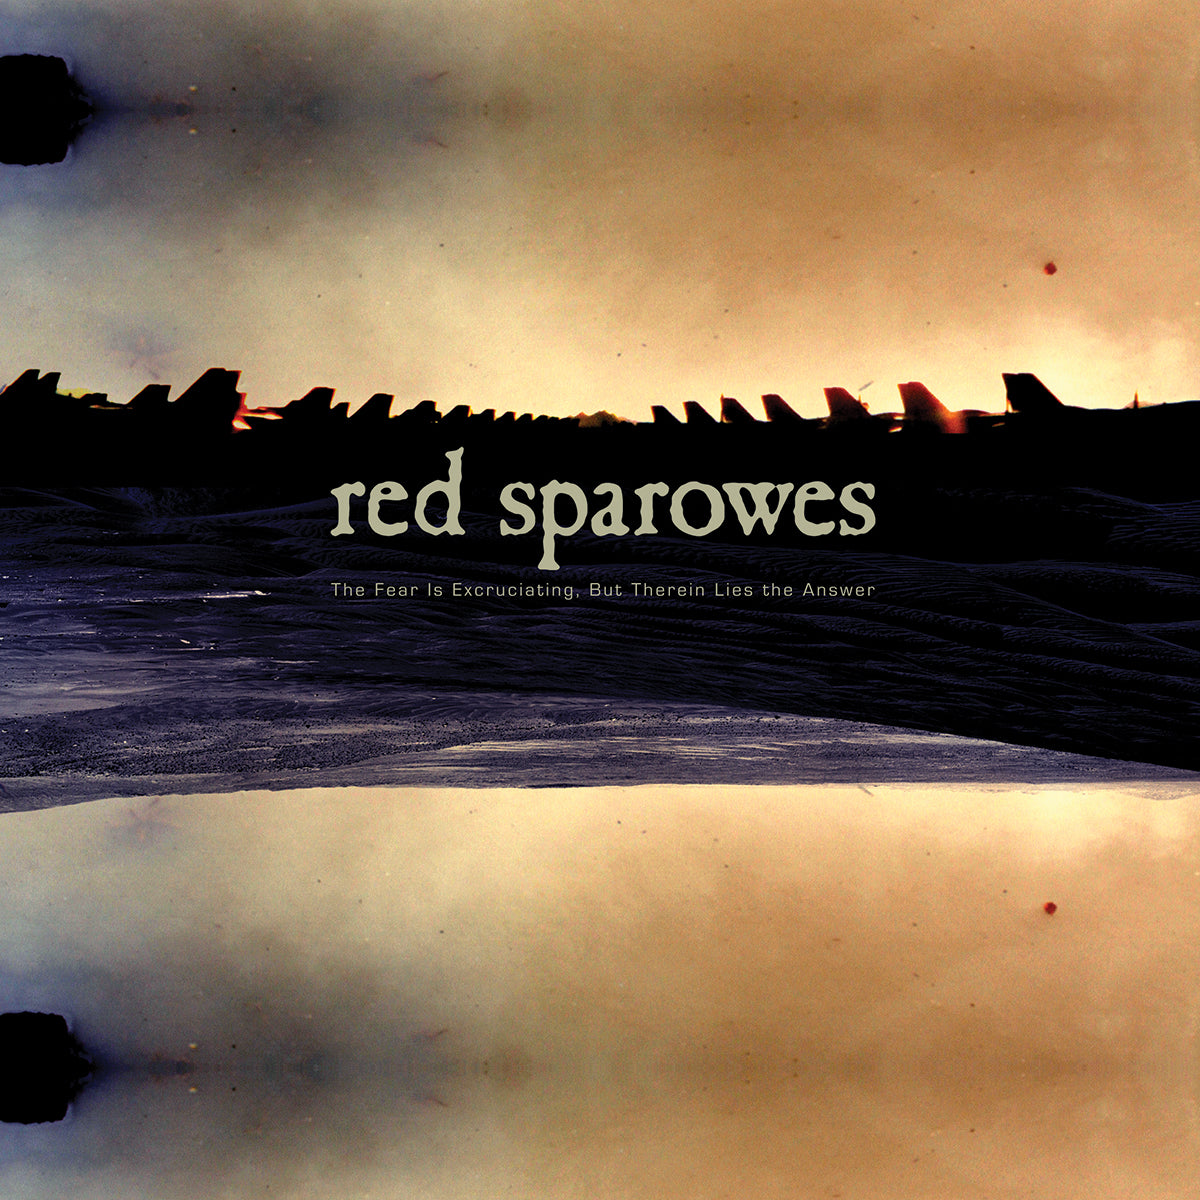 RED SPAROWES "The Fear Is Excruciating, But Therein Lies The Answer" LP